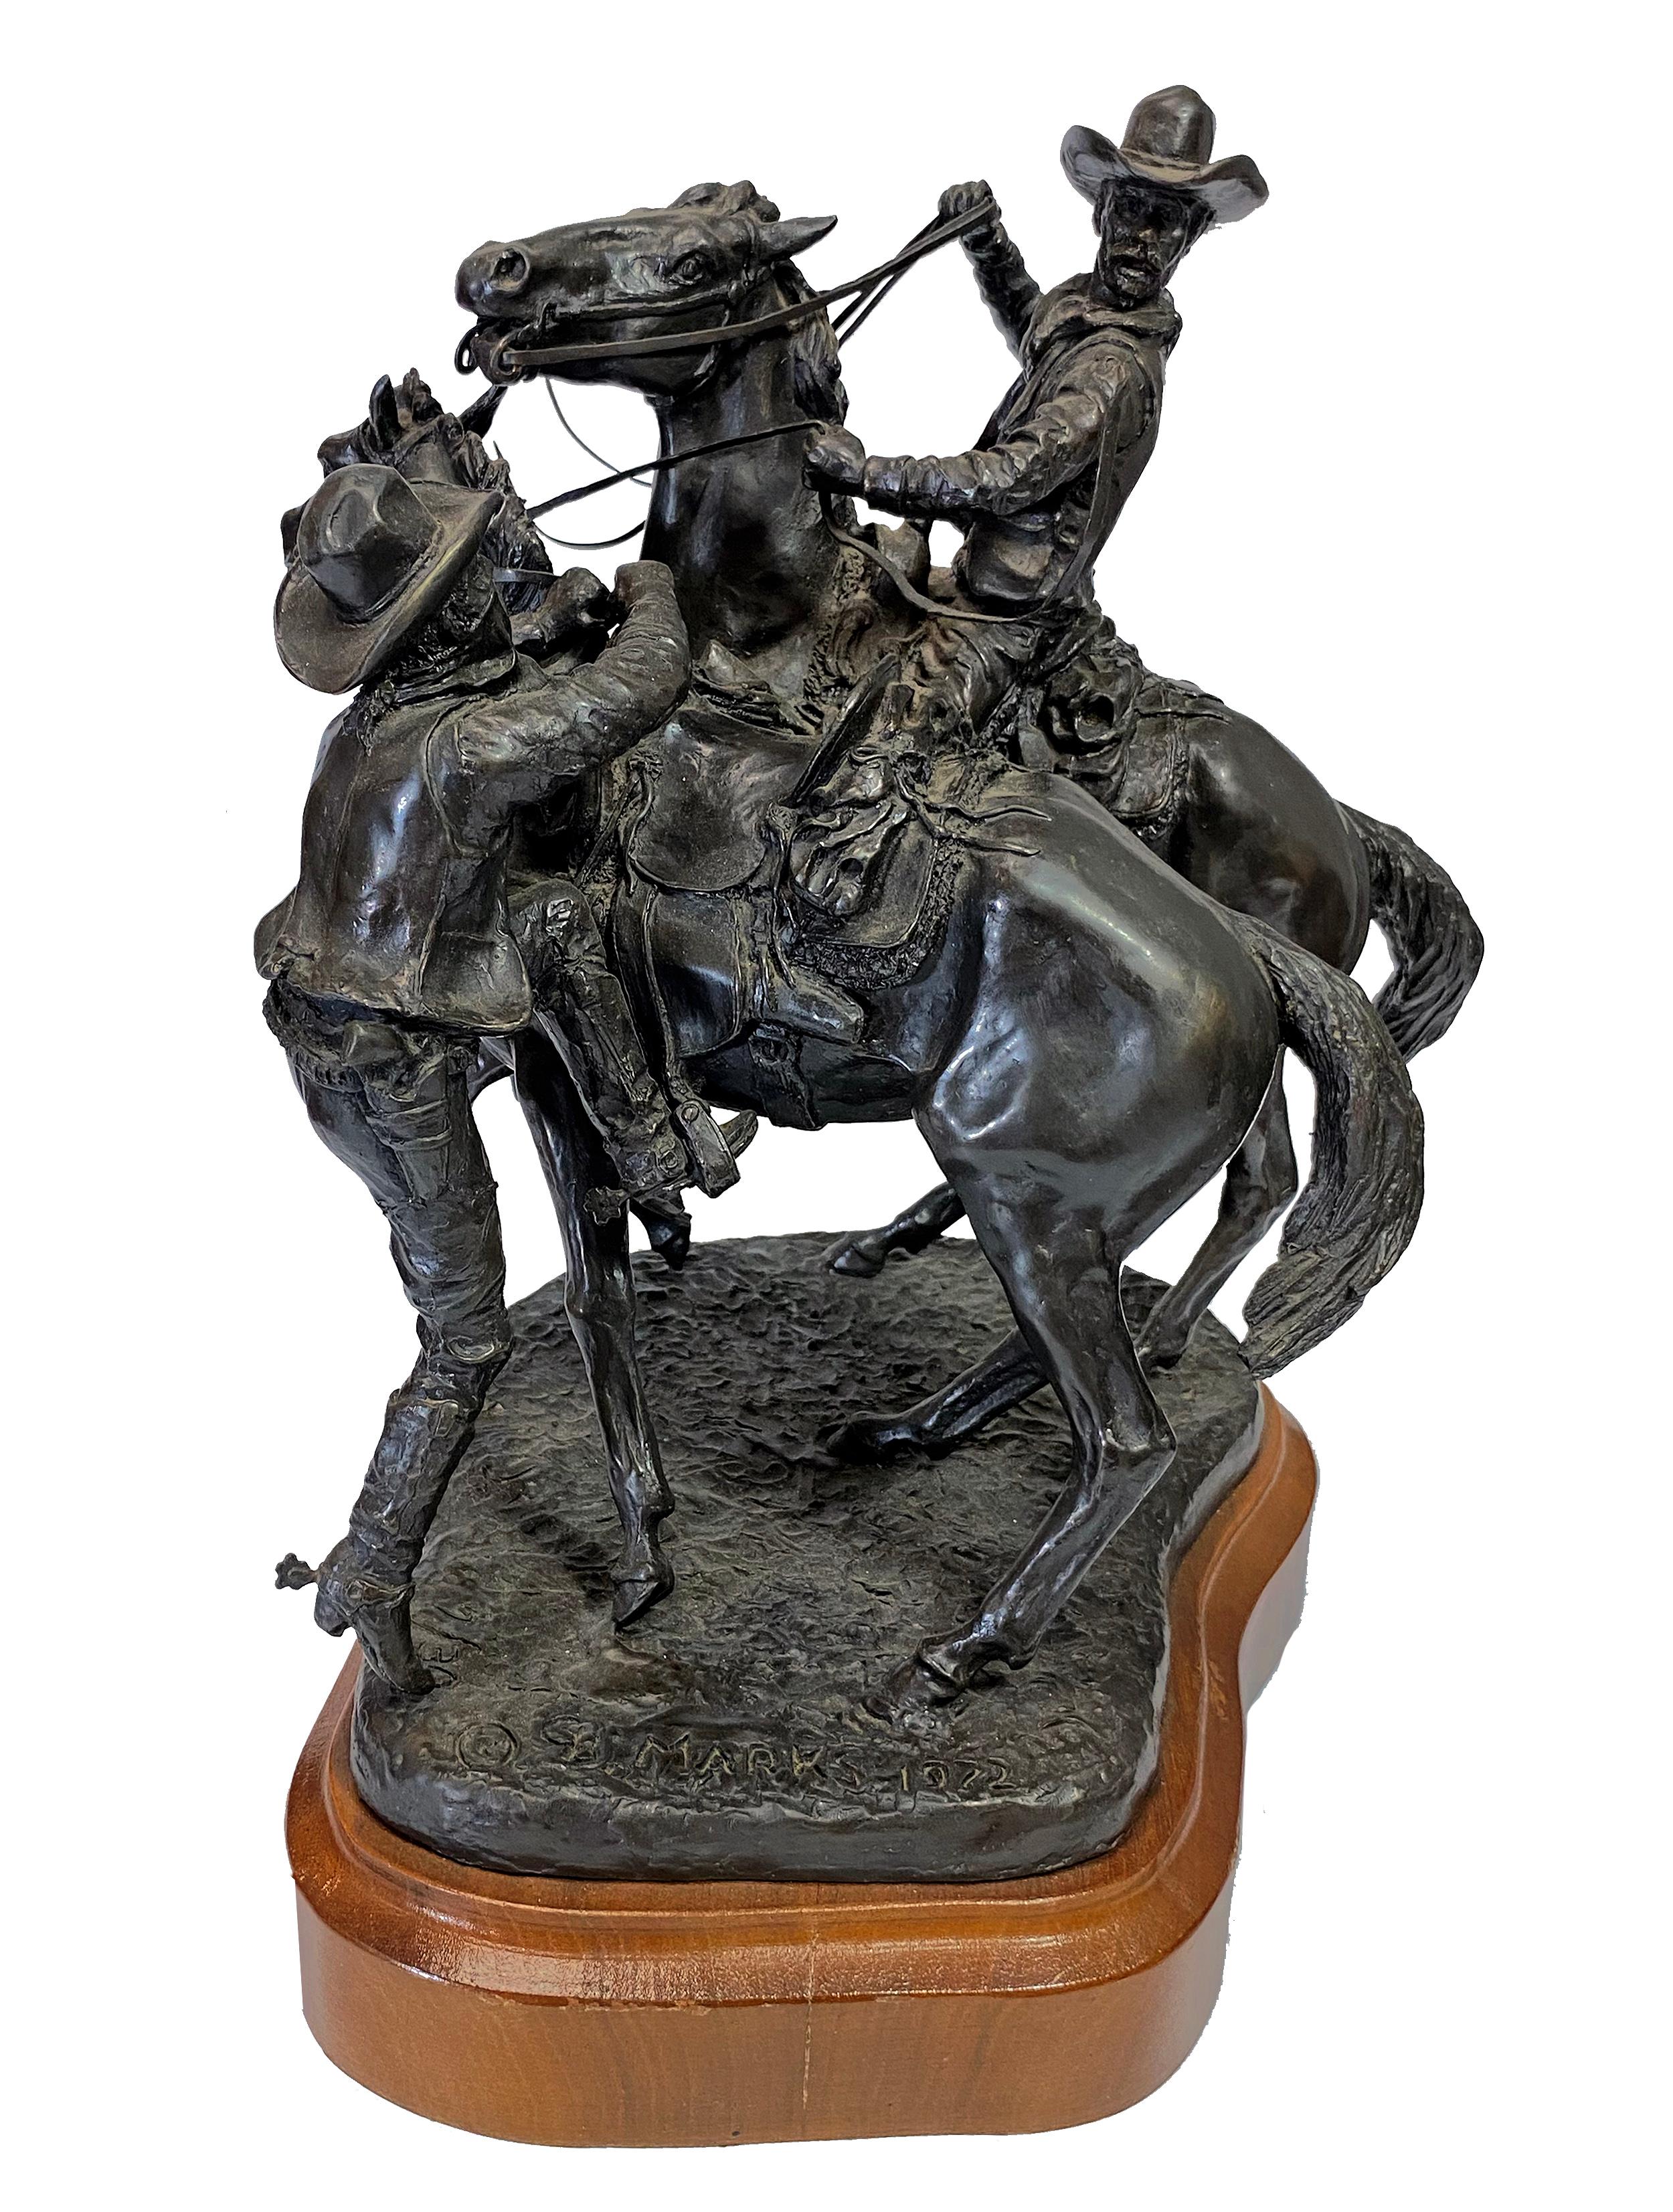 Preparing to Ride - Sculpture by George B. Marks